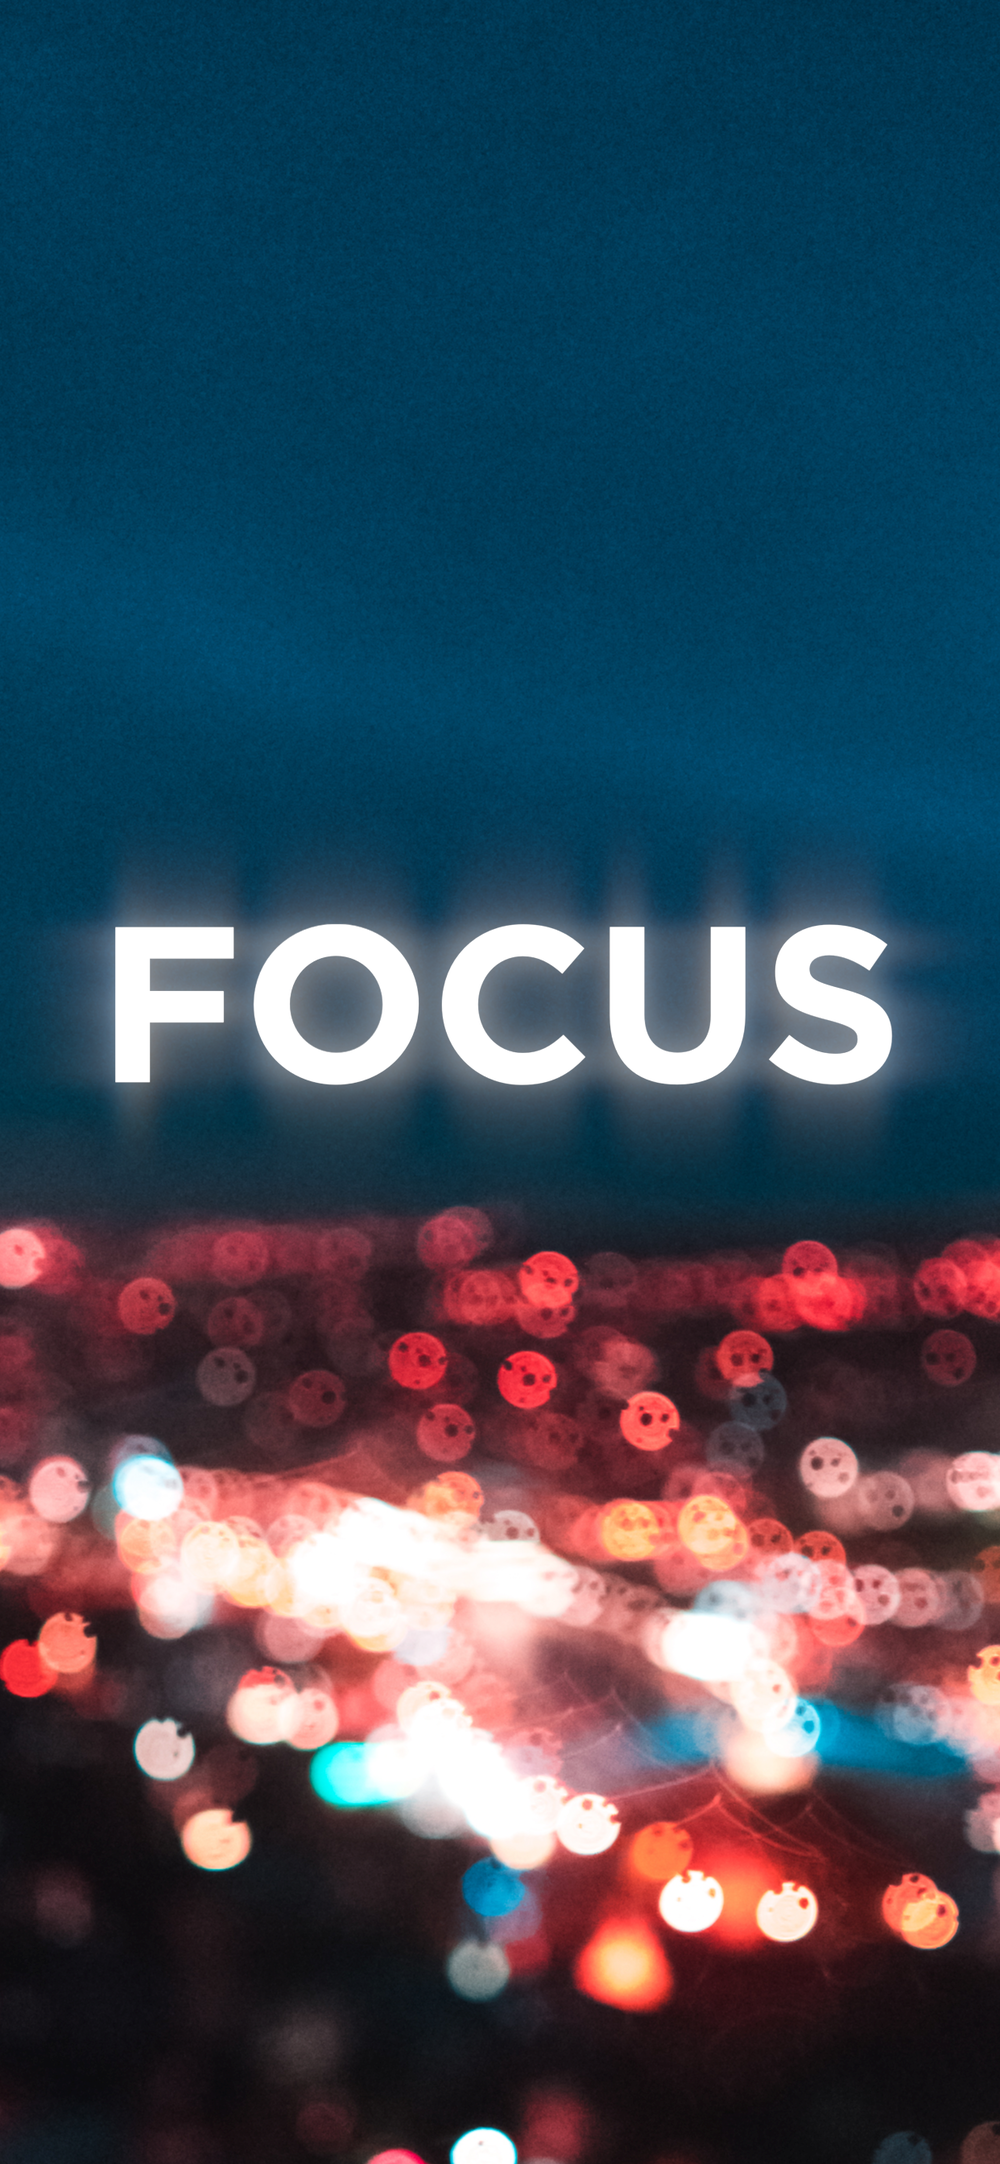 Focus full hd hdtv fhd 1080p wallpapers hd desktop backgrounds  1920x1080 images and pictures